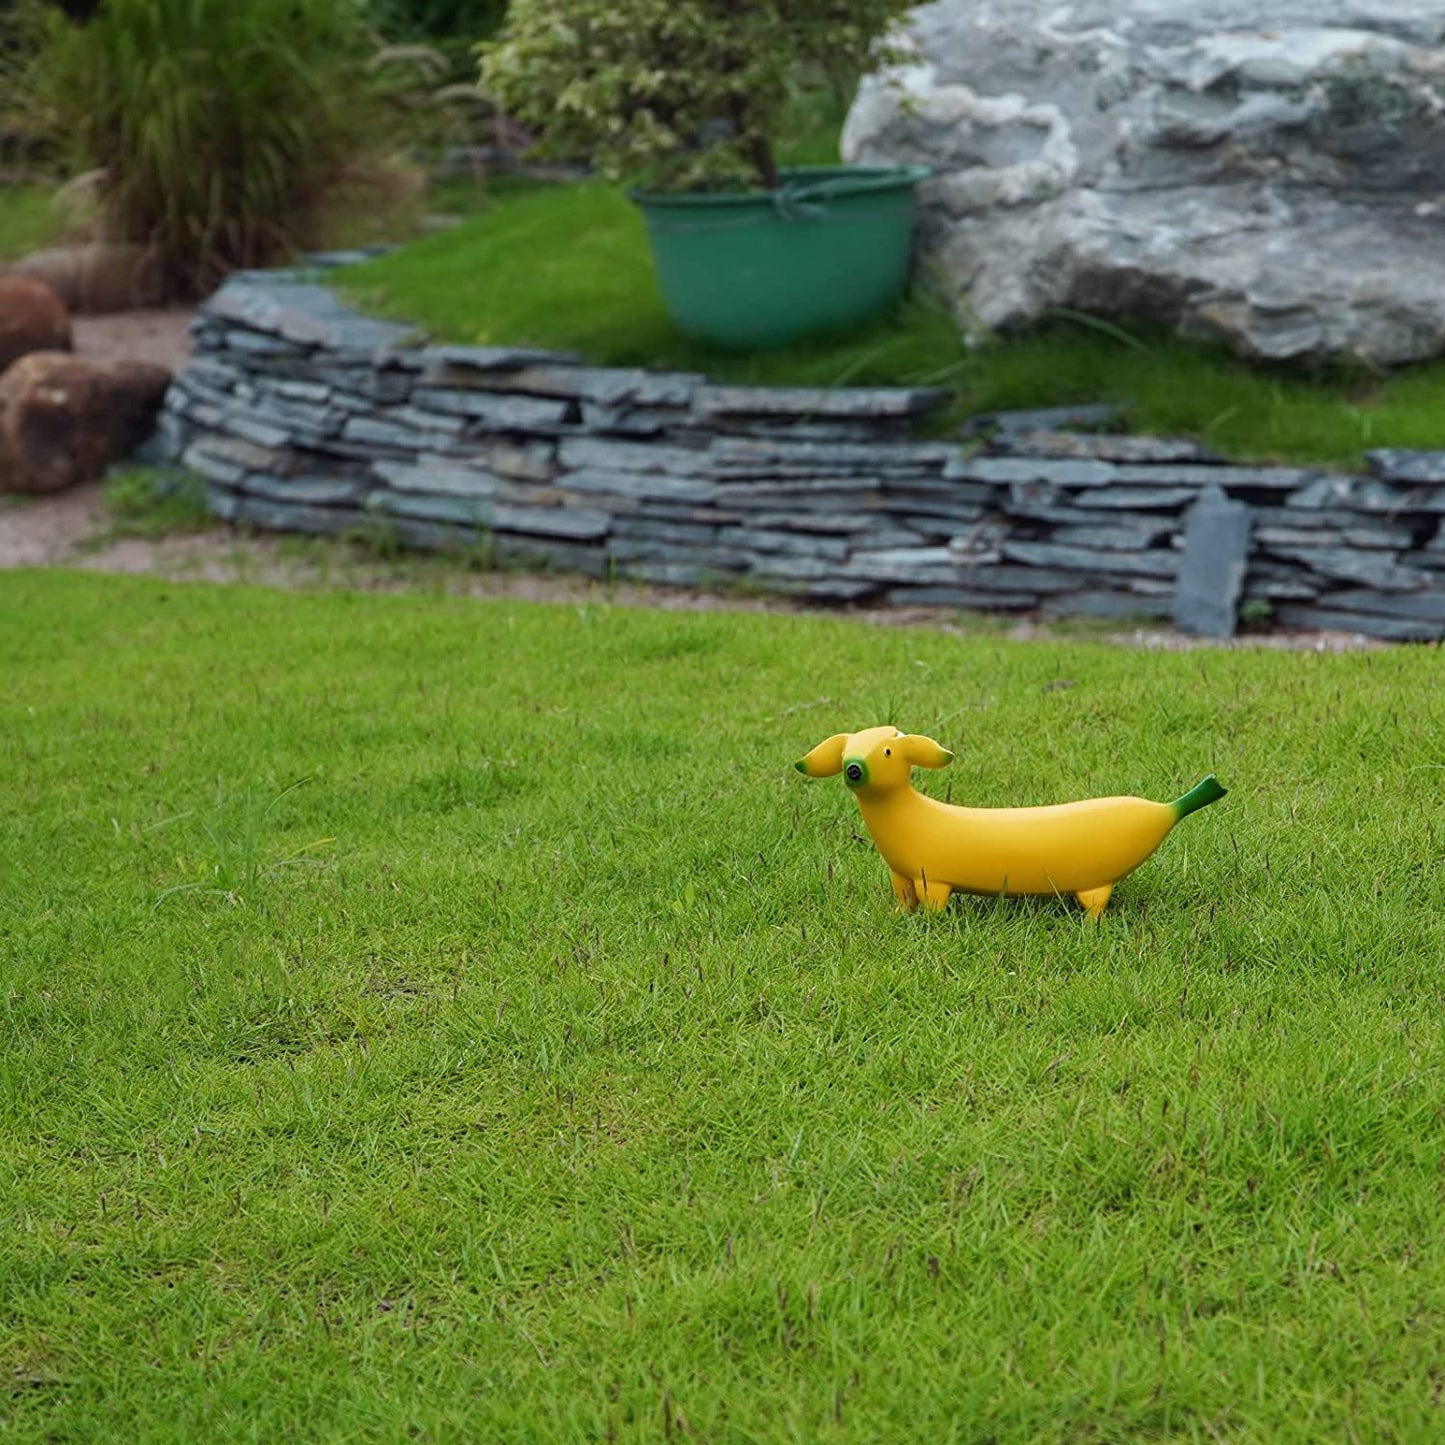 A garden ornament which is called a banana dog. The ornament is shaped like a yellow banana but has a dogs head.